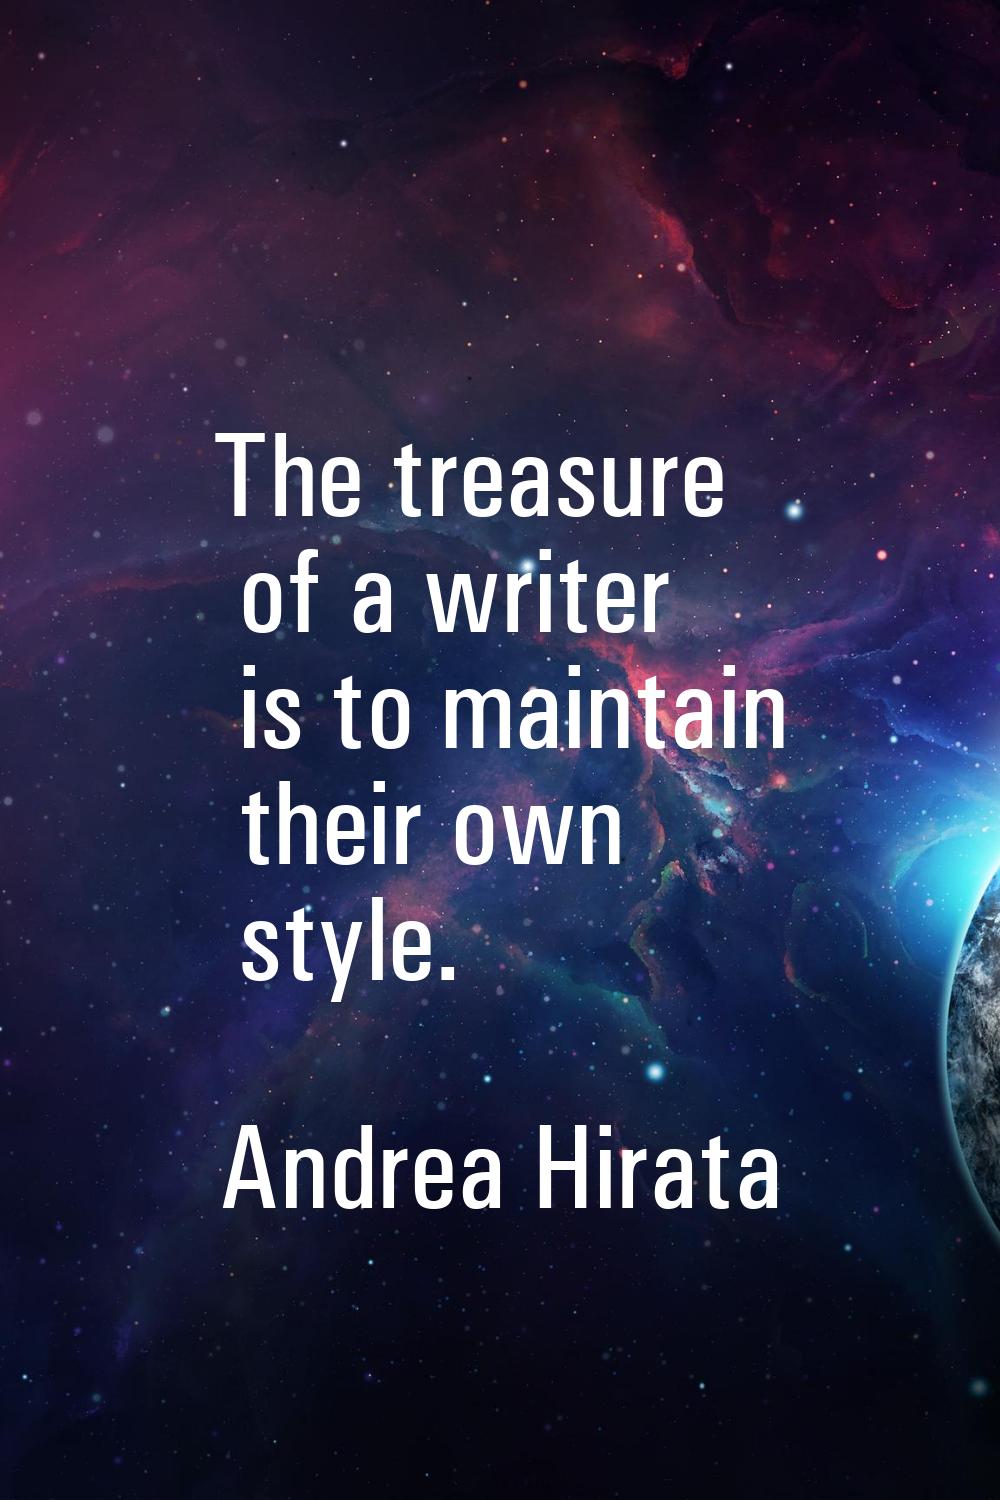 The treasure of a writer is to maintain their own style.